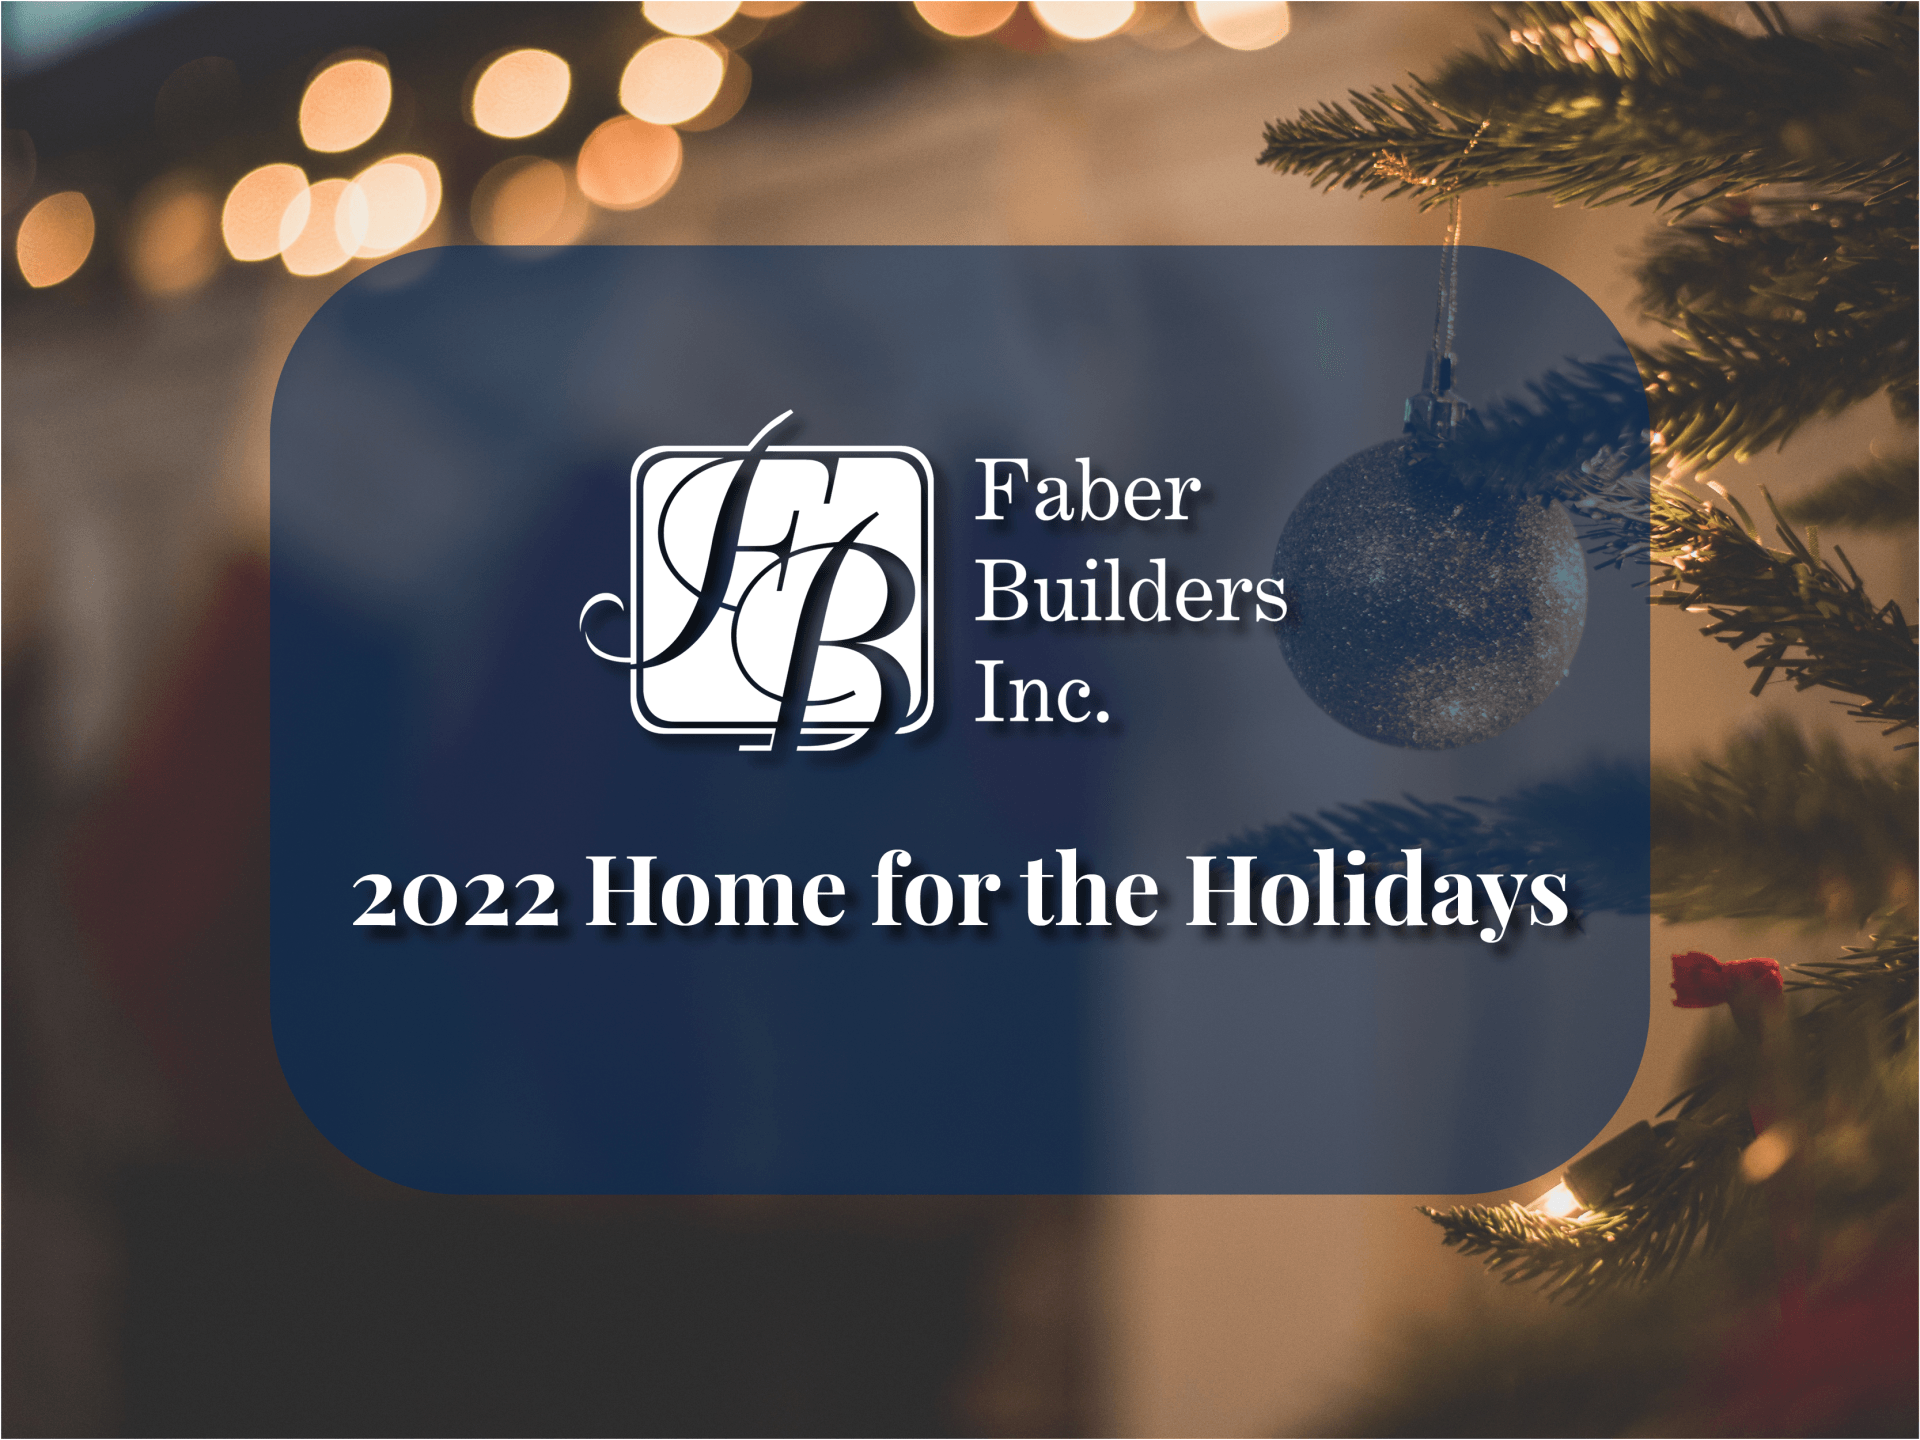 2022 Home for the Holidays on a holiday tree background